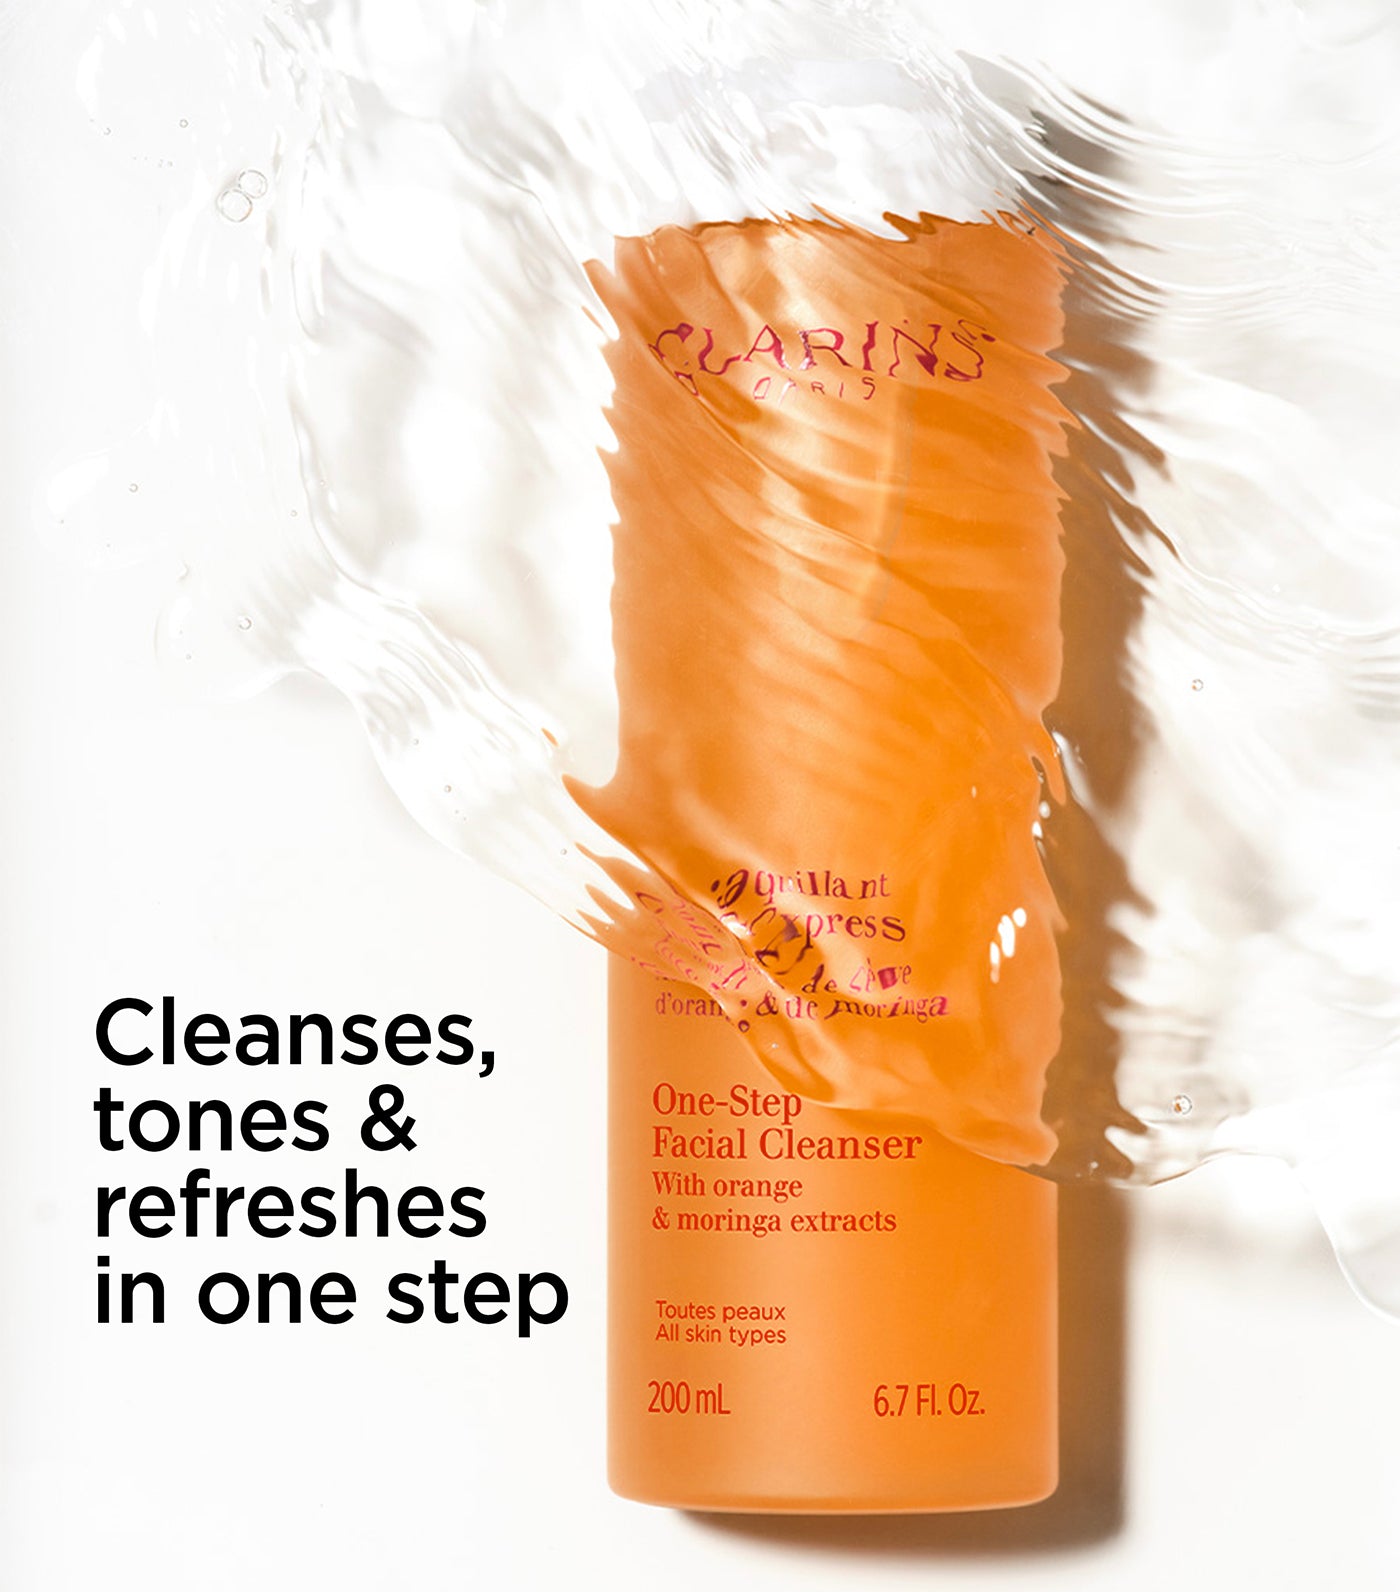 One-Step Facial Cleanser